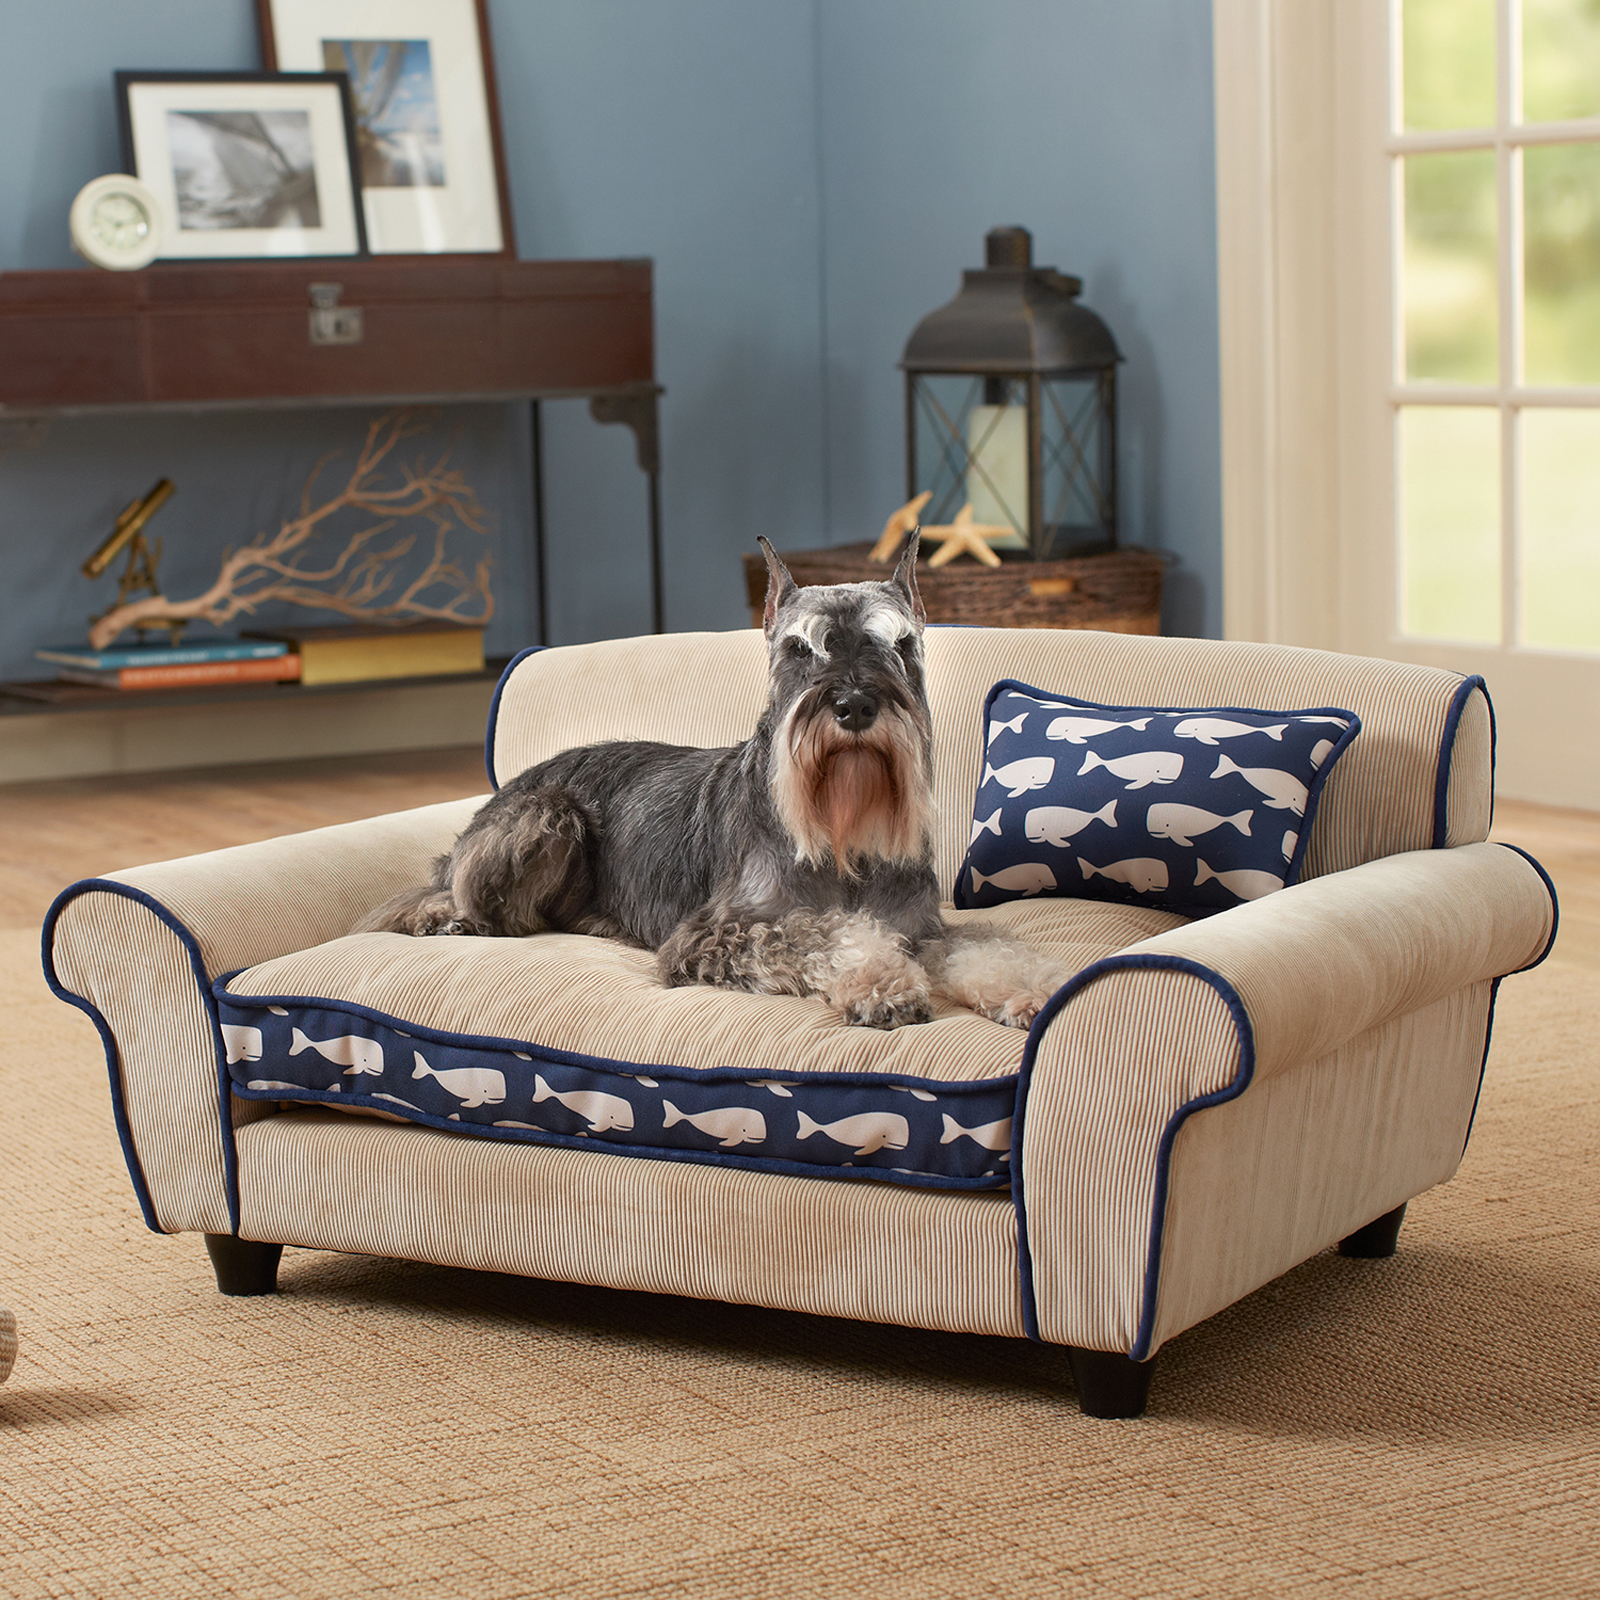 Enchanted Home Pet Mattituck Pet Sofa Bed, 34 by 21 by 17-Inch, Beige/Navy